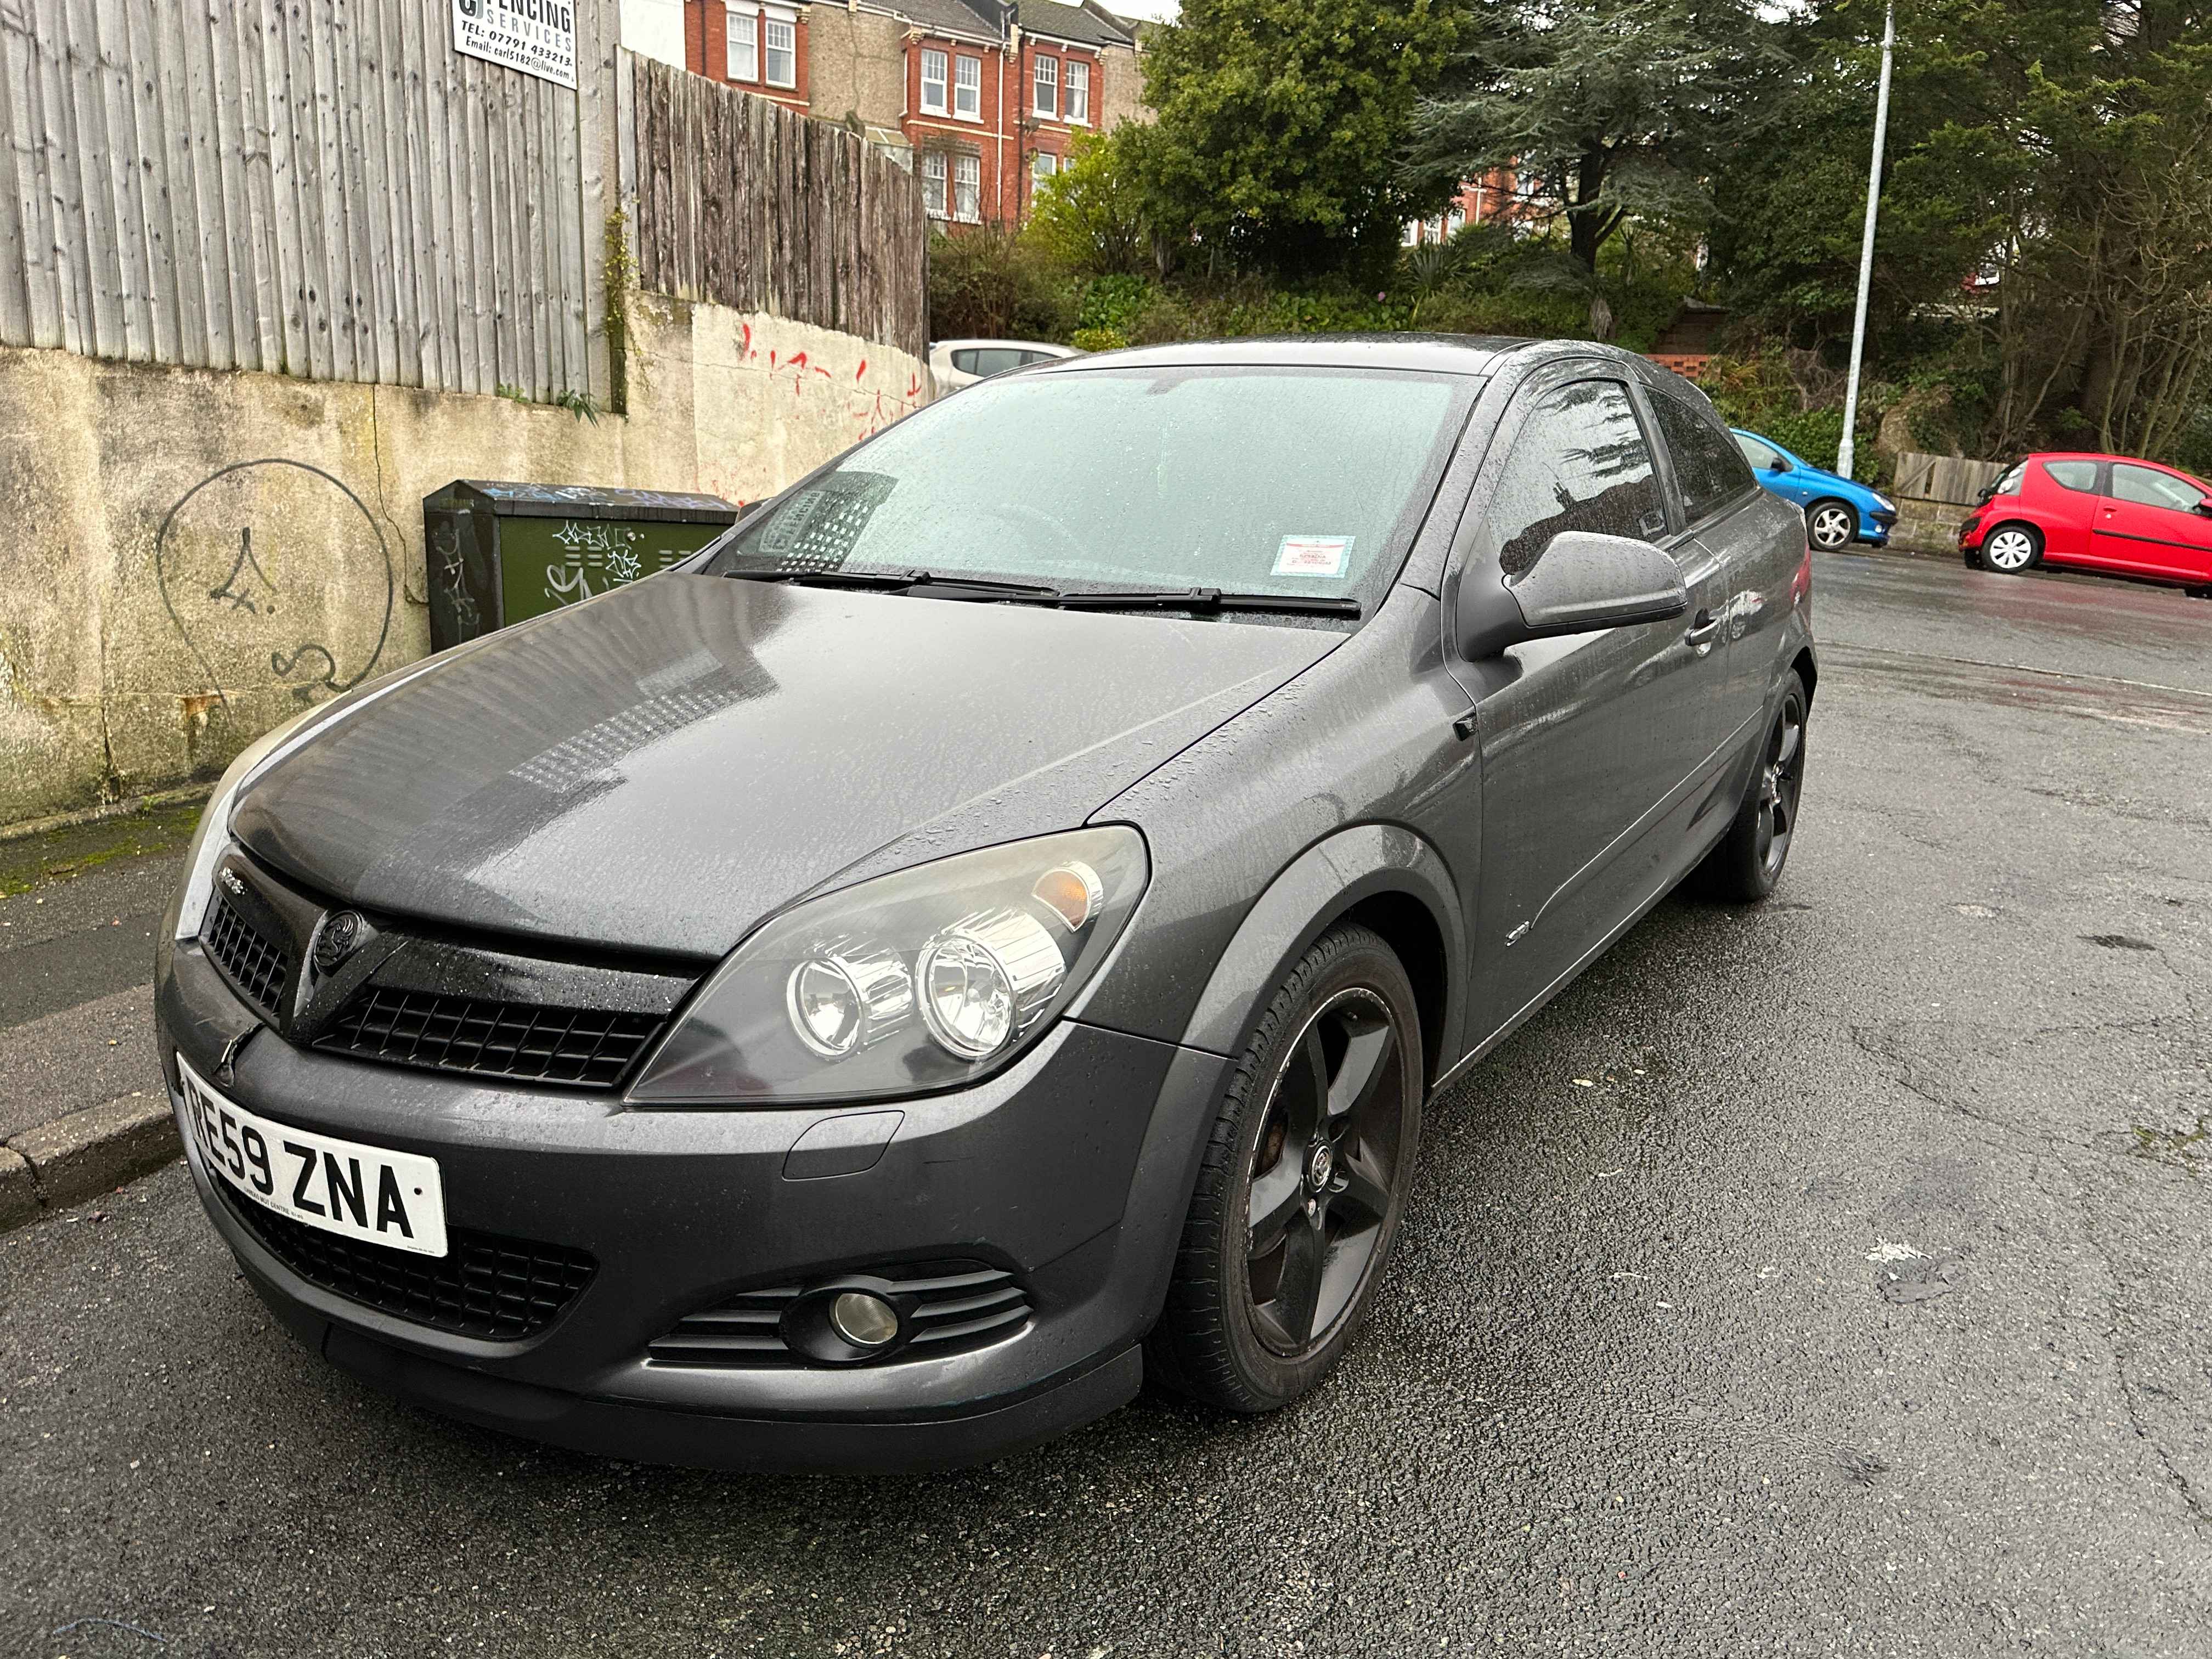 Photograph of RE59 ZNA - a Grey Vauxhall Astra parked in Hollingdean by a non-resident. The third of five photographs supplied by the residents of Hollingdean.